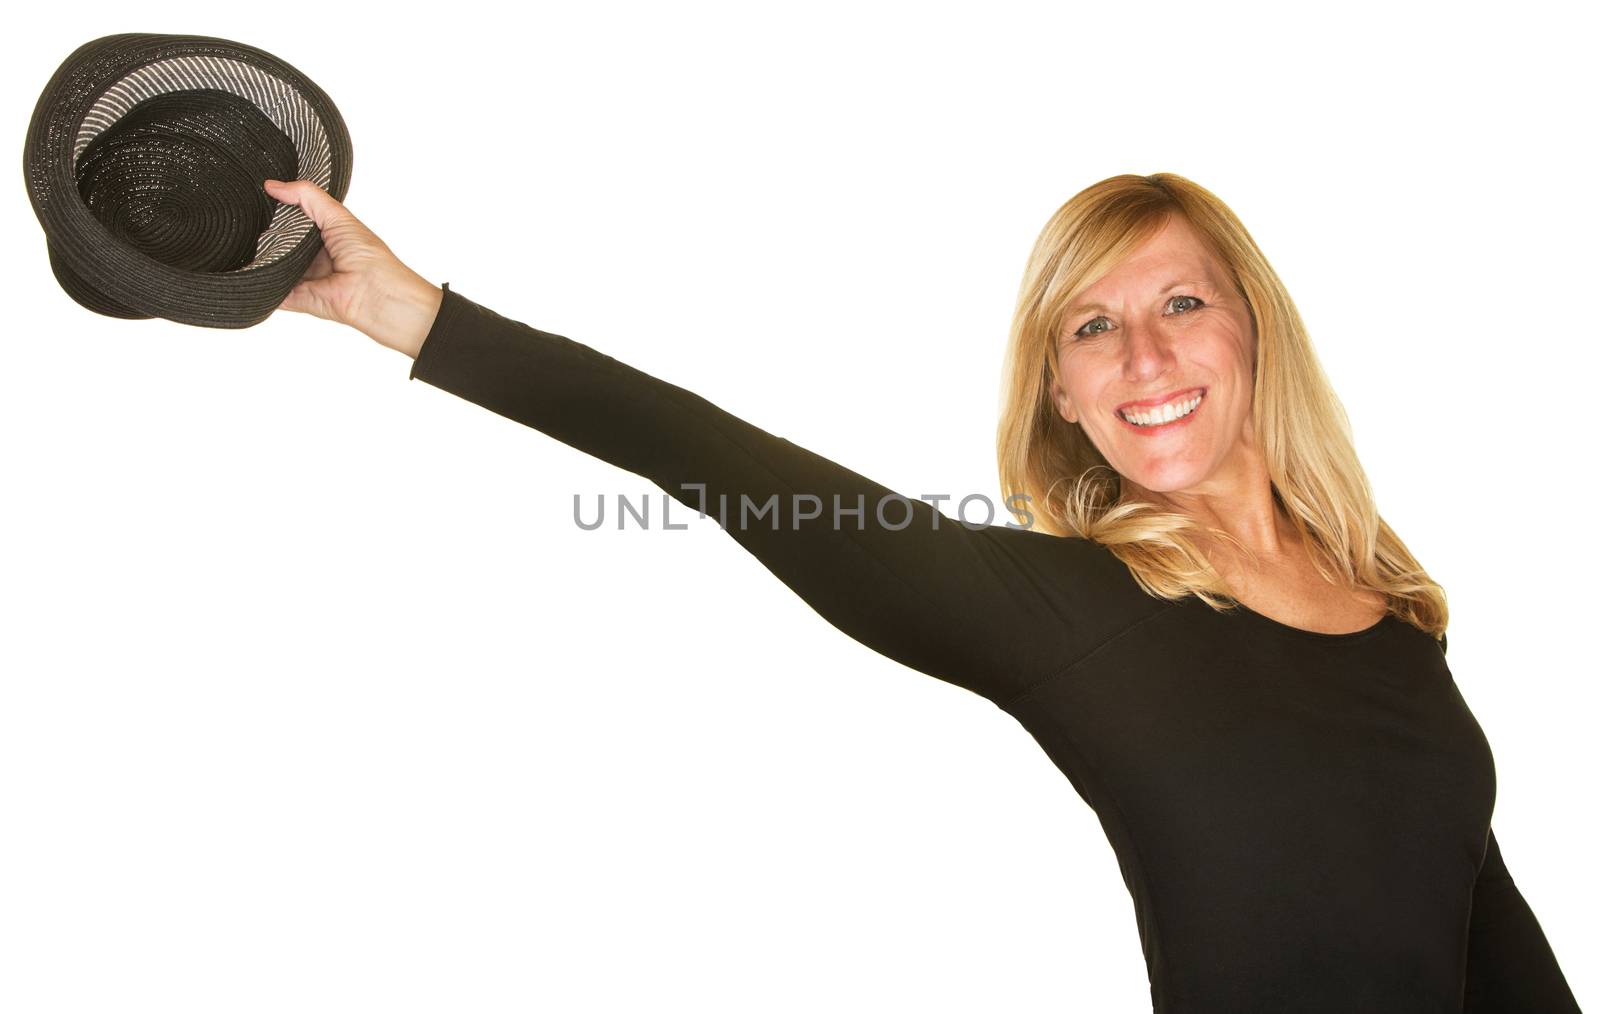 Cute female dancer holding out hat over white background